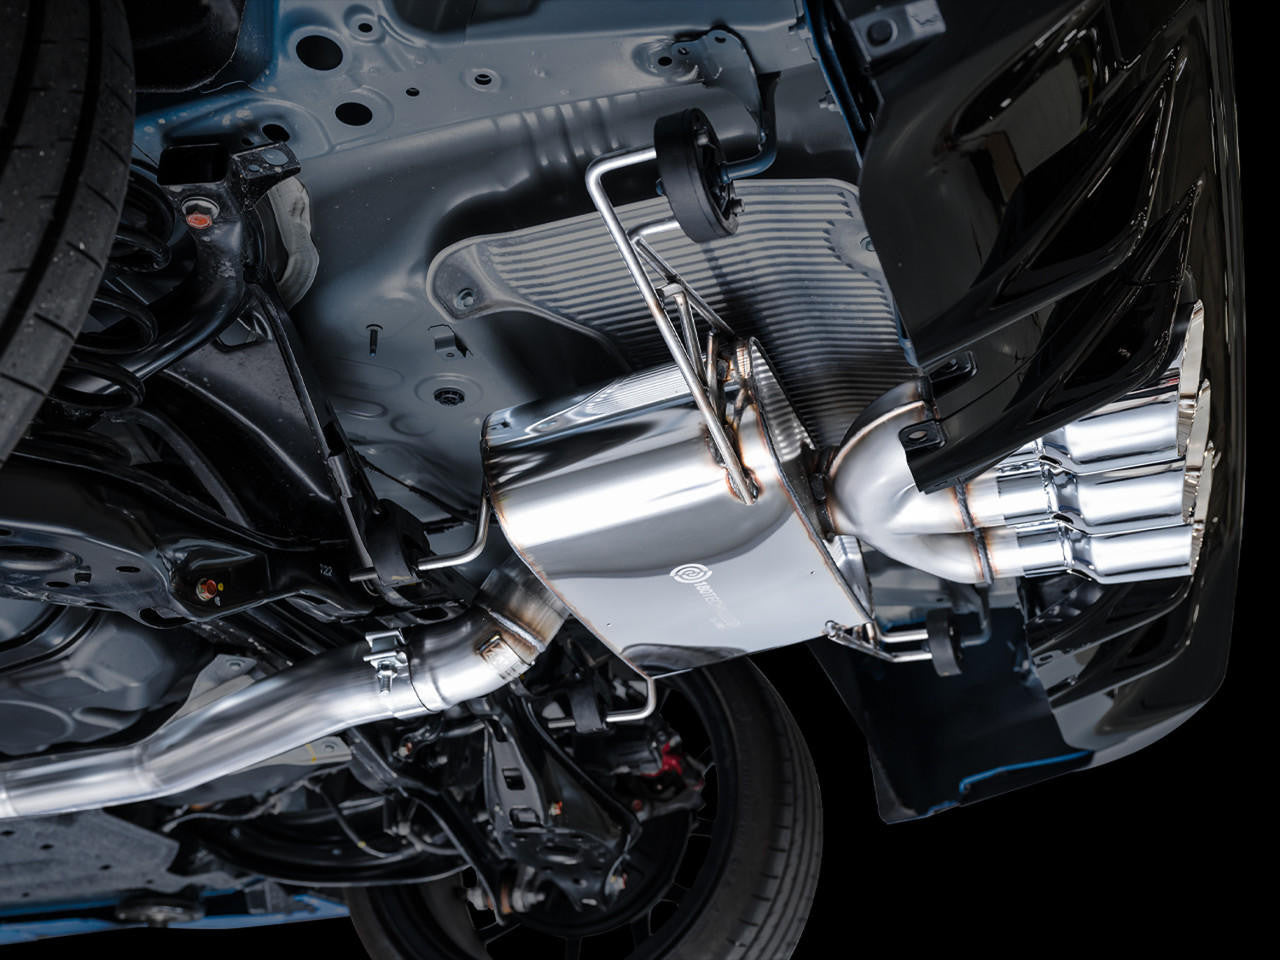 AWE Tuning AWE Touring Edition Exhaust for FL5 Civic Type R - Triple Chrome Silver Tips 3015-52287 